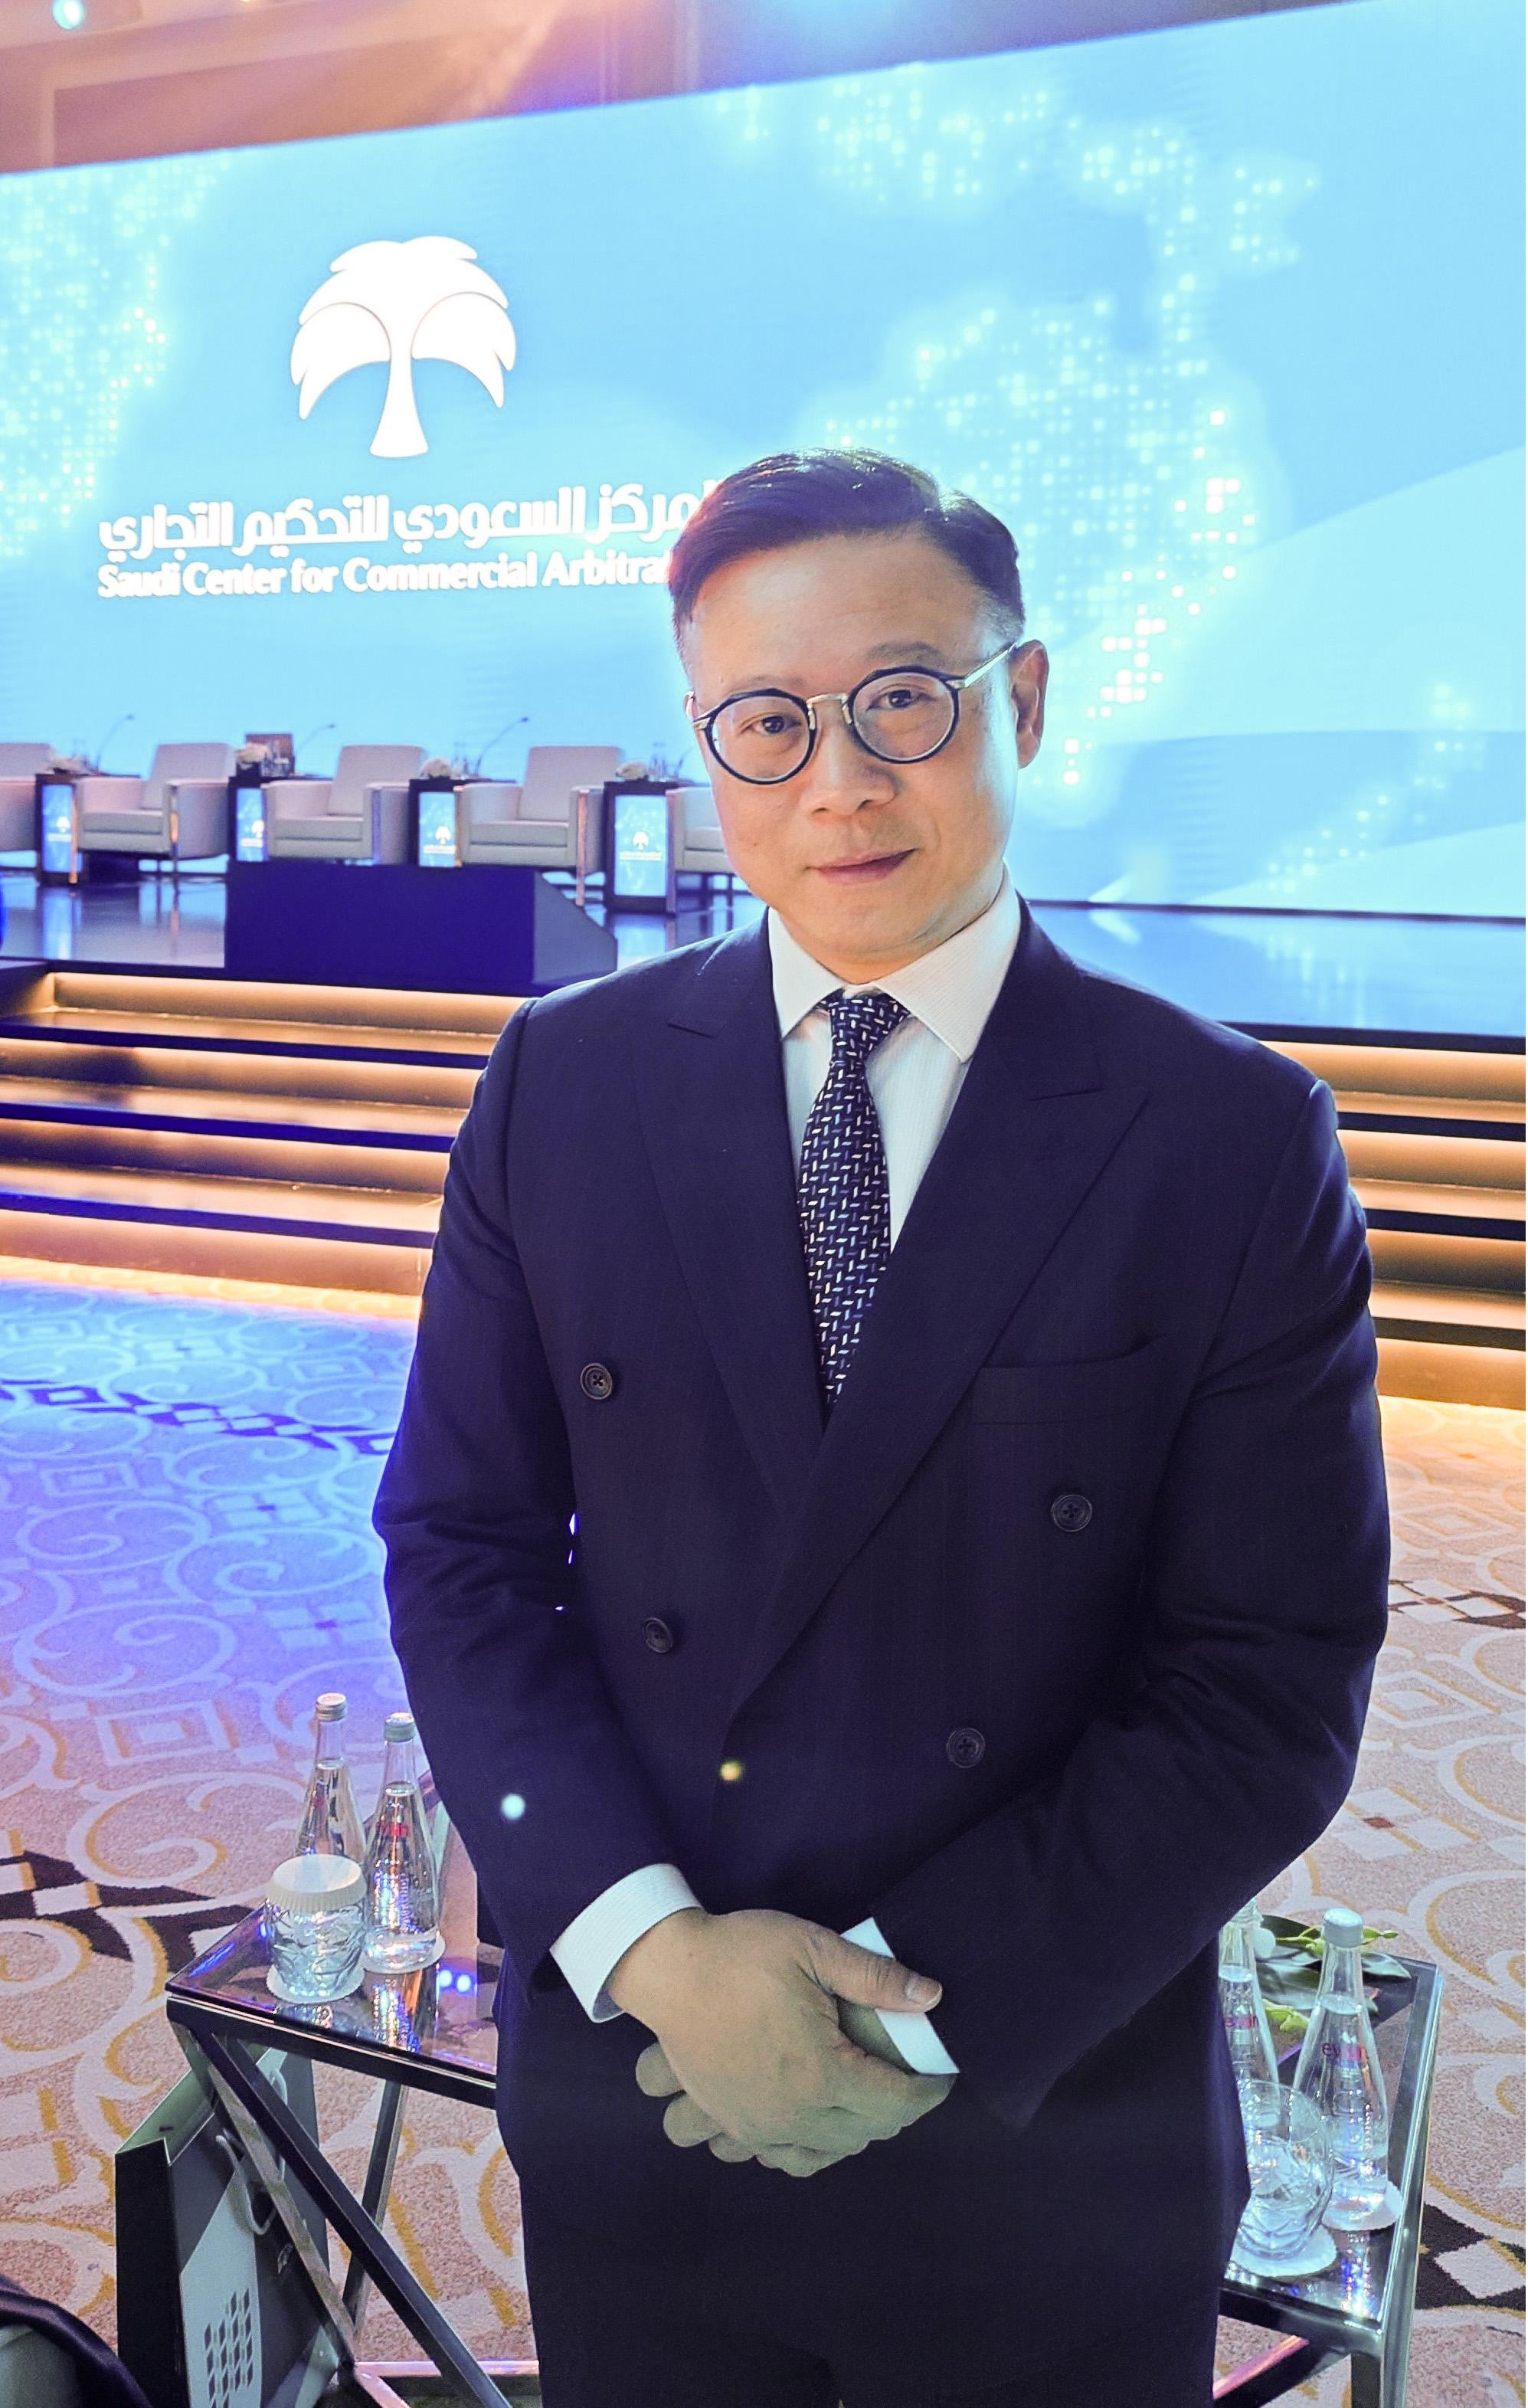 The Deputy Secretary for Justice, Mr Cheung Kwok-kwan, attends the 3rd International Conference and Exhibition organised by the Saudi Center for Commercial Arbitration in Riyadh, Saudi Arabia, on March 6 (Riyadh time), gathering senior officials and industry experts from various regions to discuss the development of dispute resolution in Saudi Arabia and around the world.
